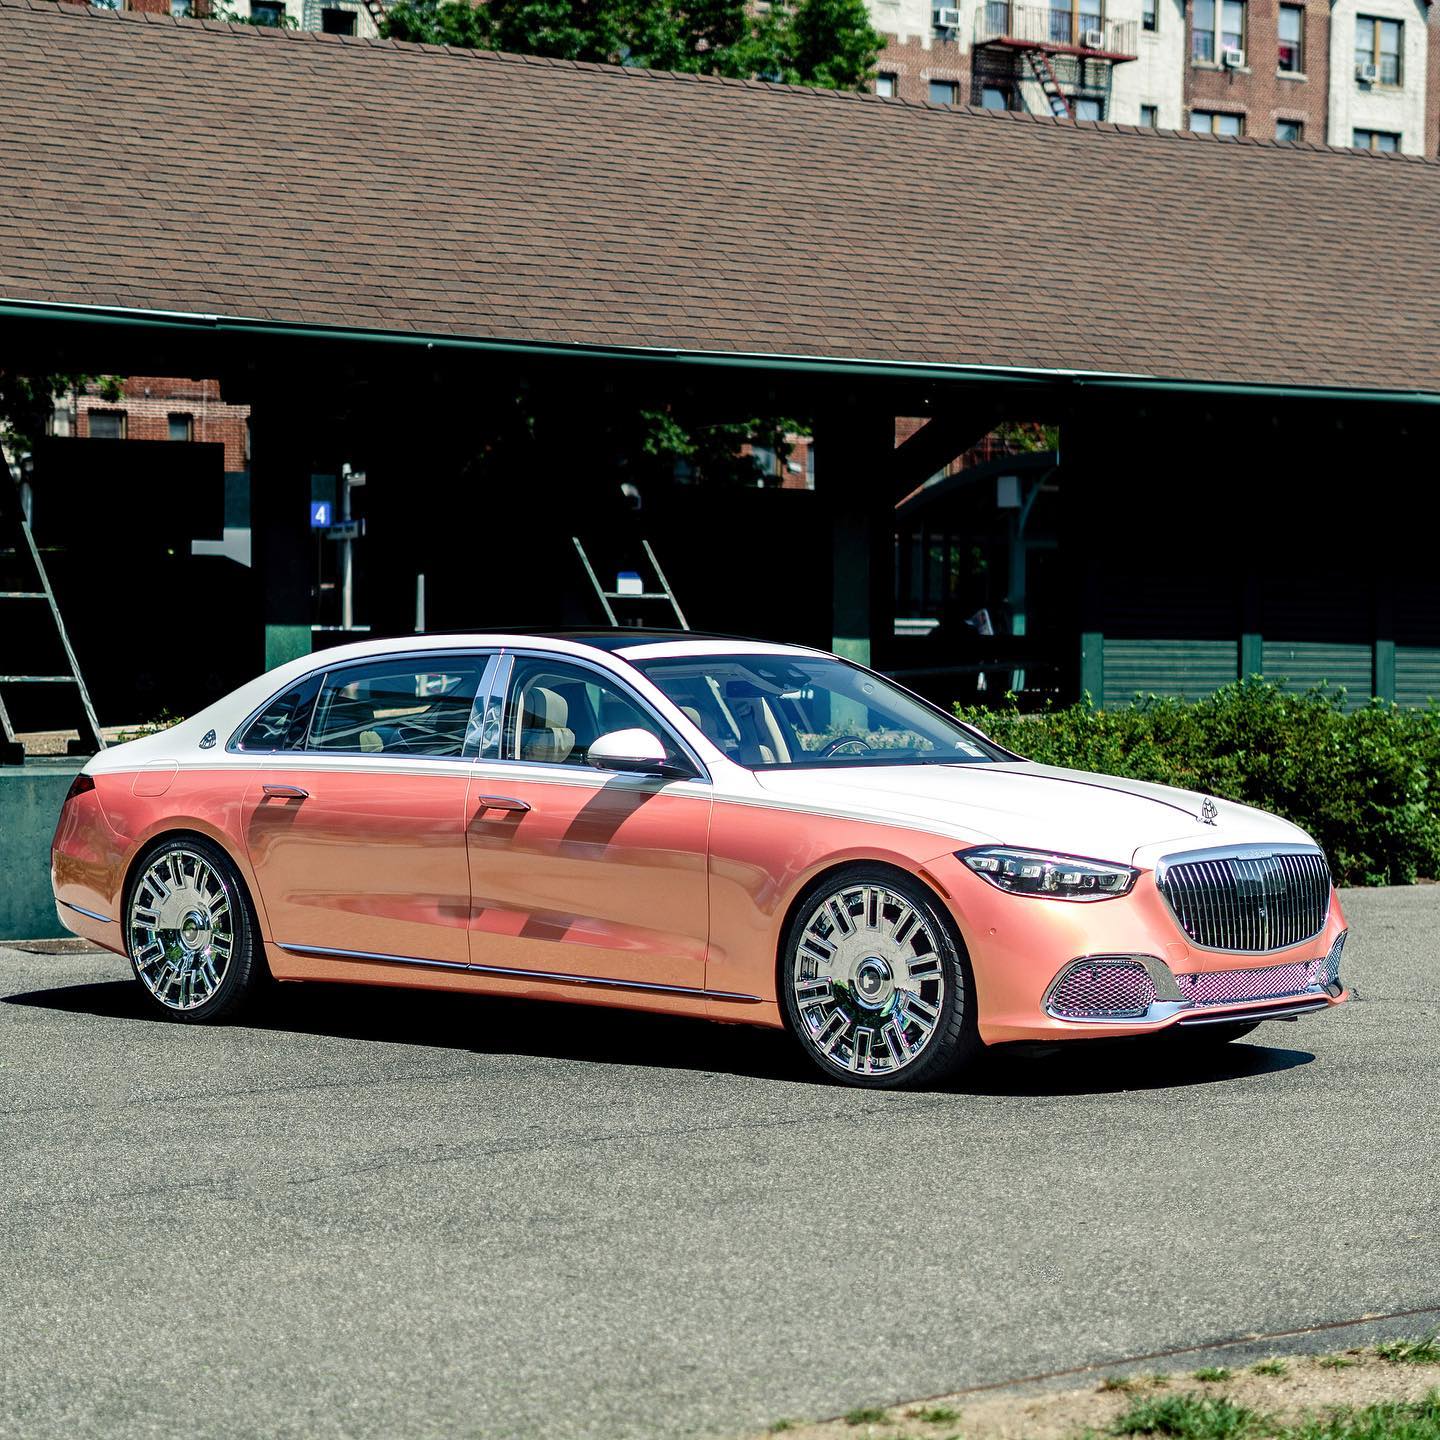 Two-Tone Maybach S 580 Laid on Chromed Forgis Has Those Summer